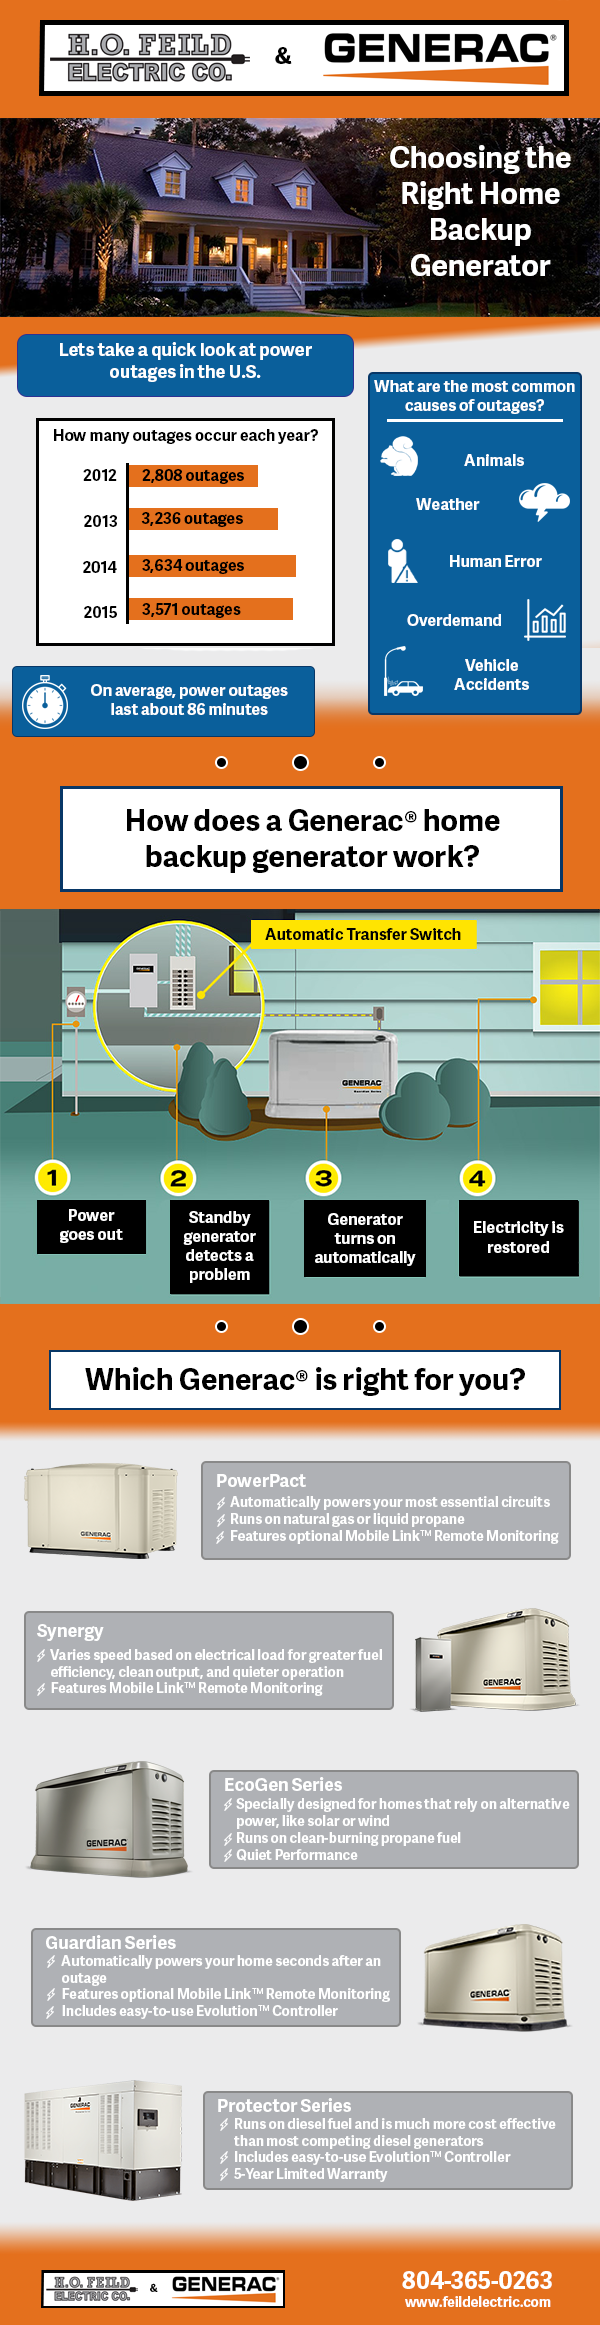 Choosing the Right Home Backup Generator